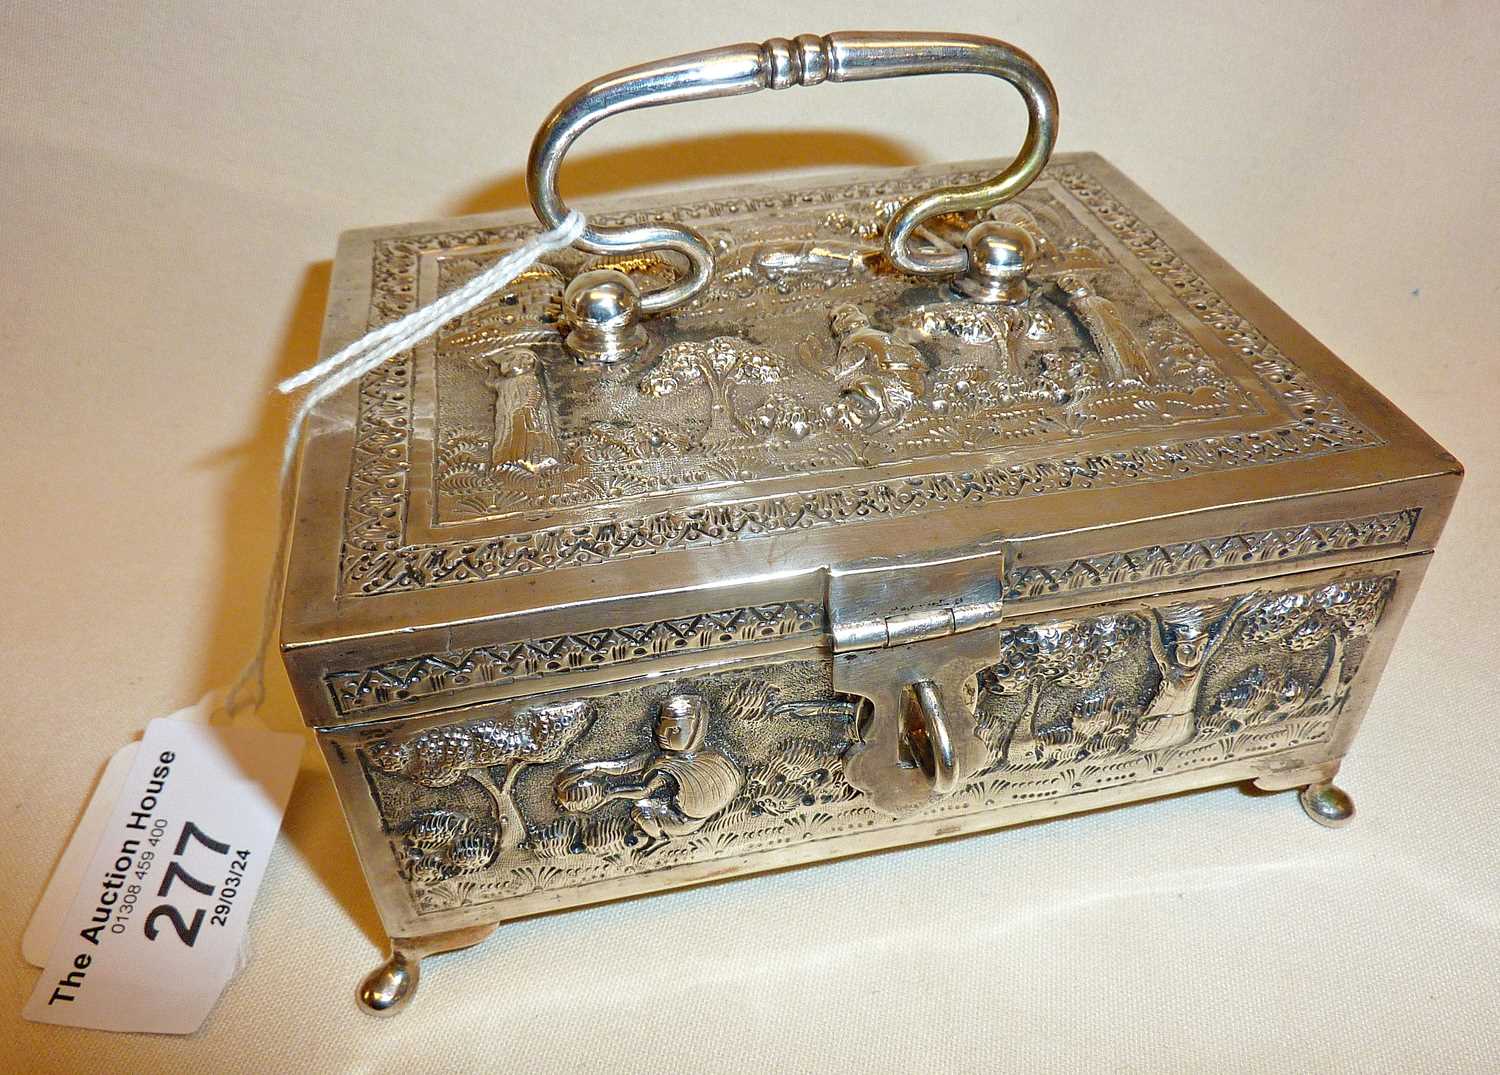 Indian silver casket with figural and jungle scenes, Lucknow, c. 1900, approx. 12cm long and 6.5cm - Image 4 of 4